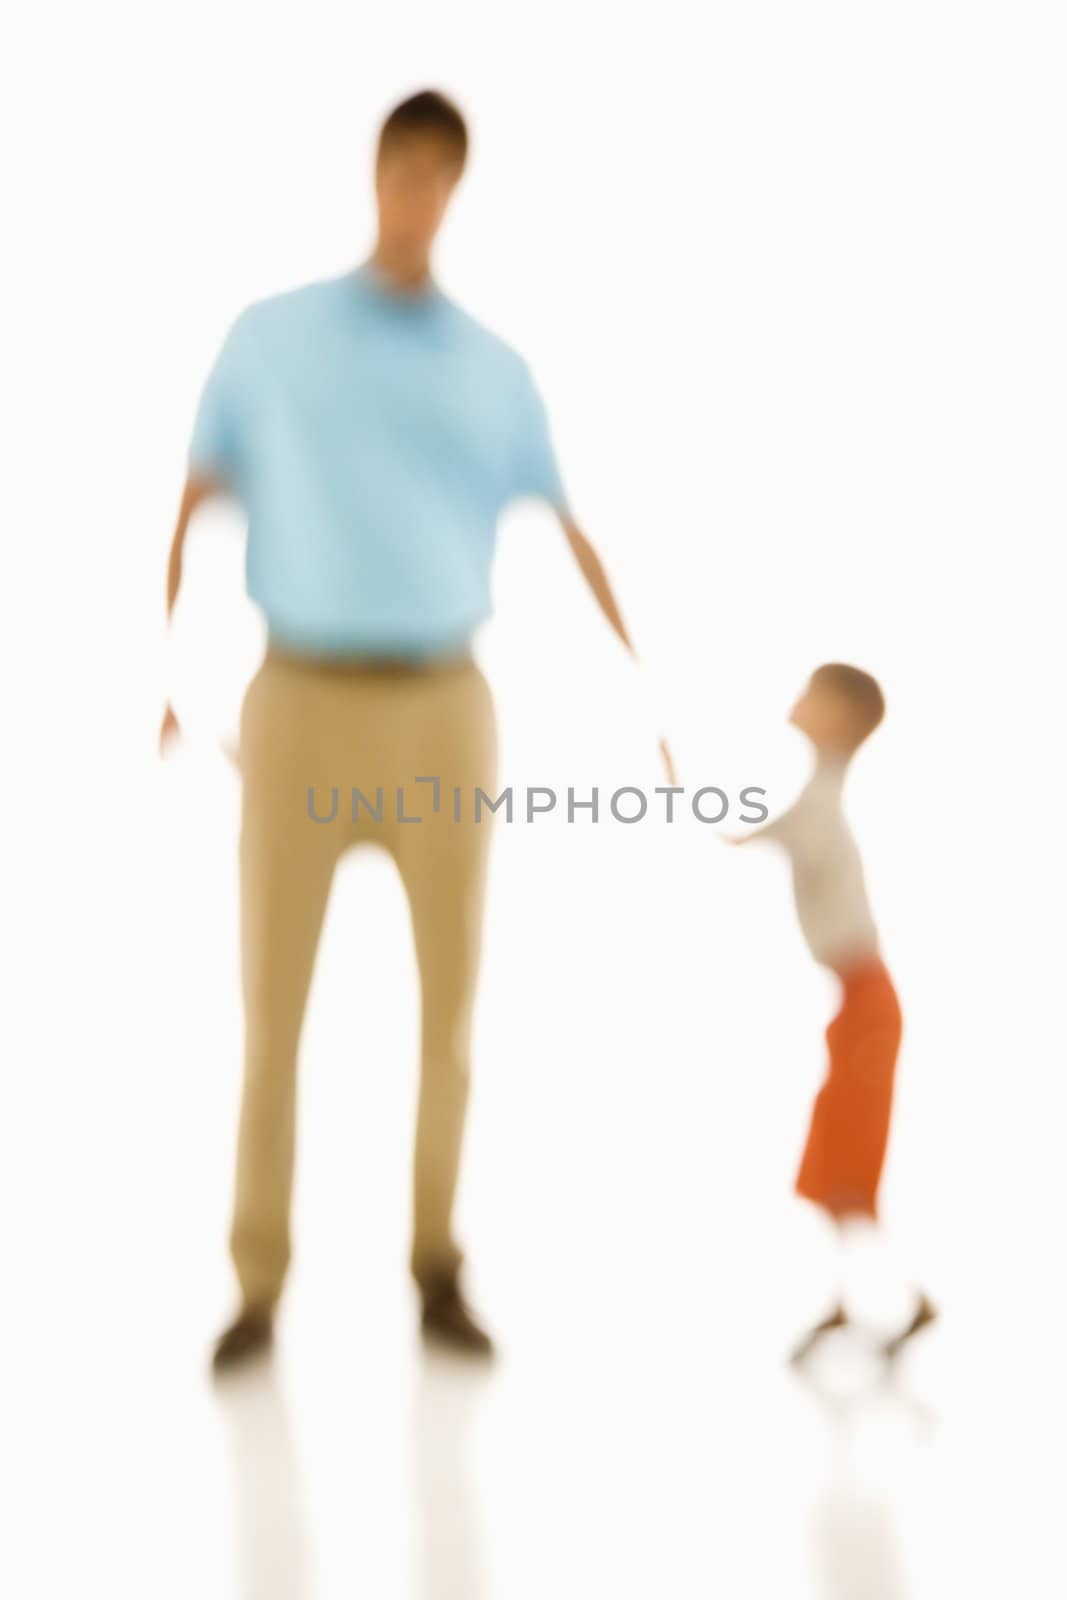 Soft focus father holding son's hand.